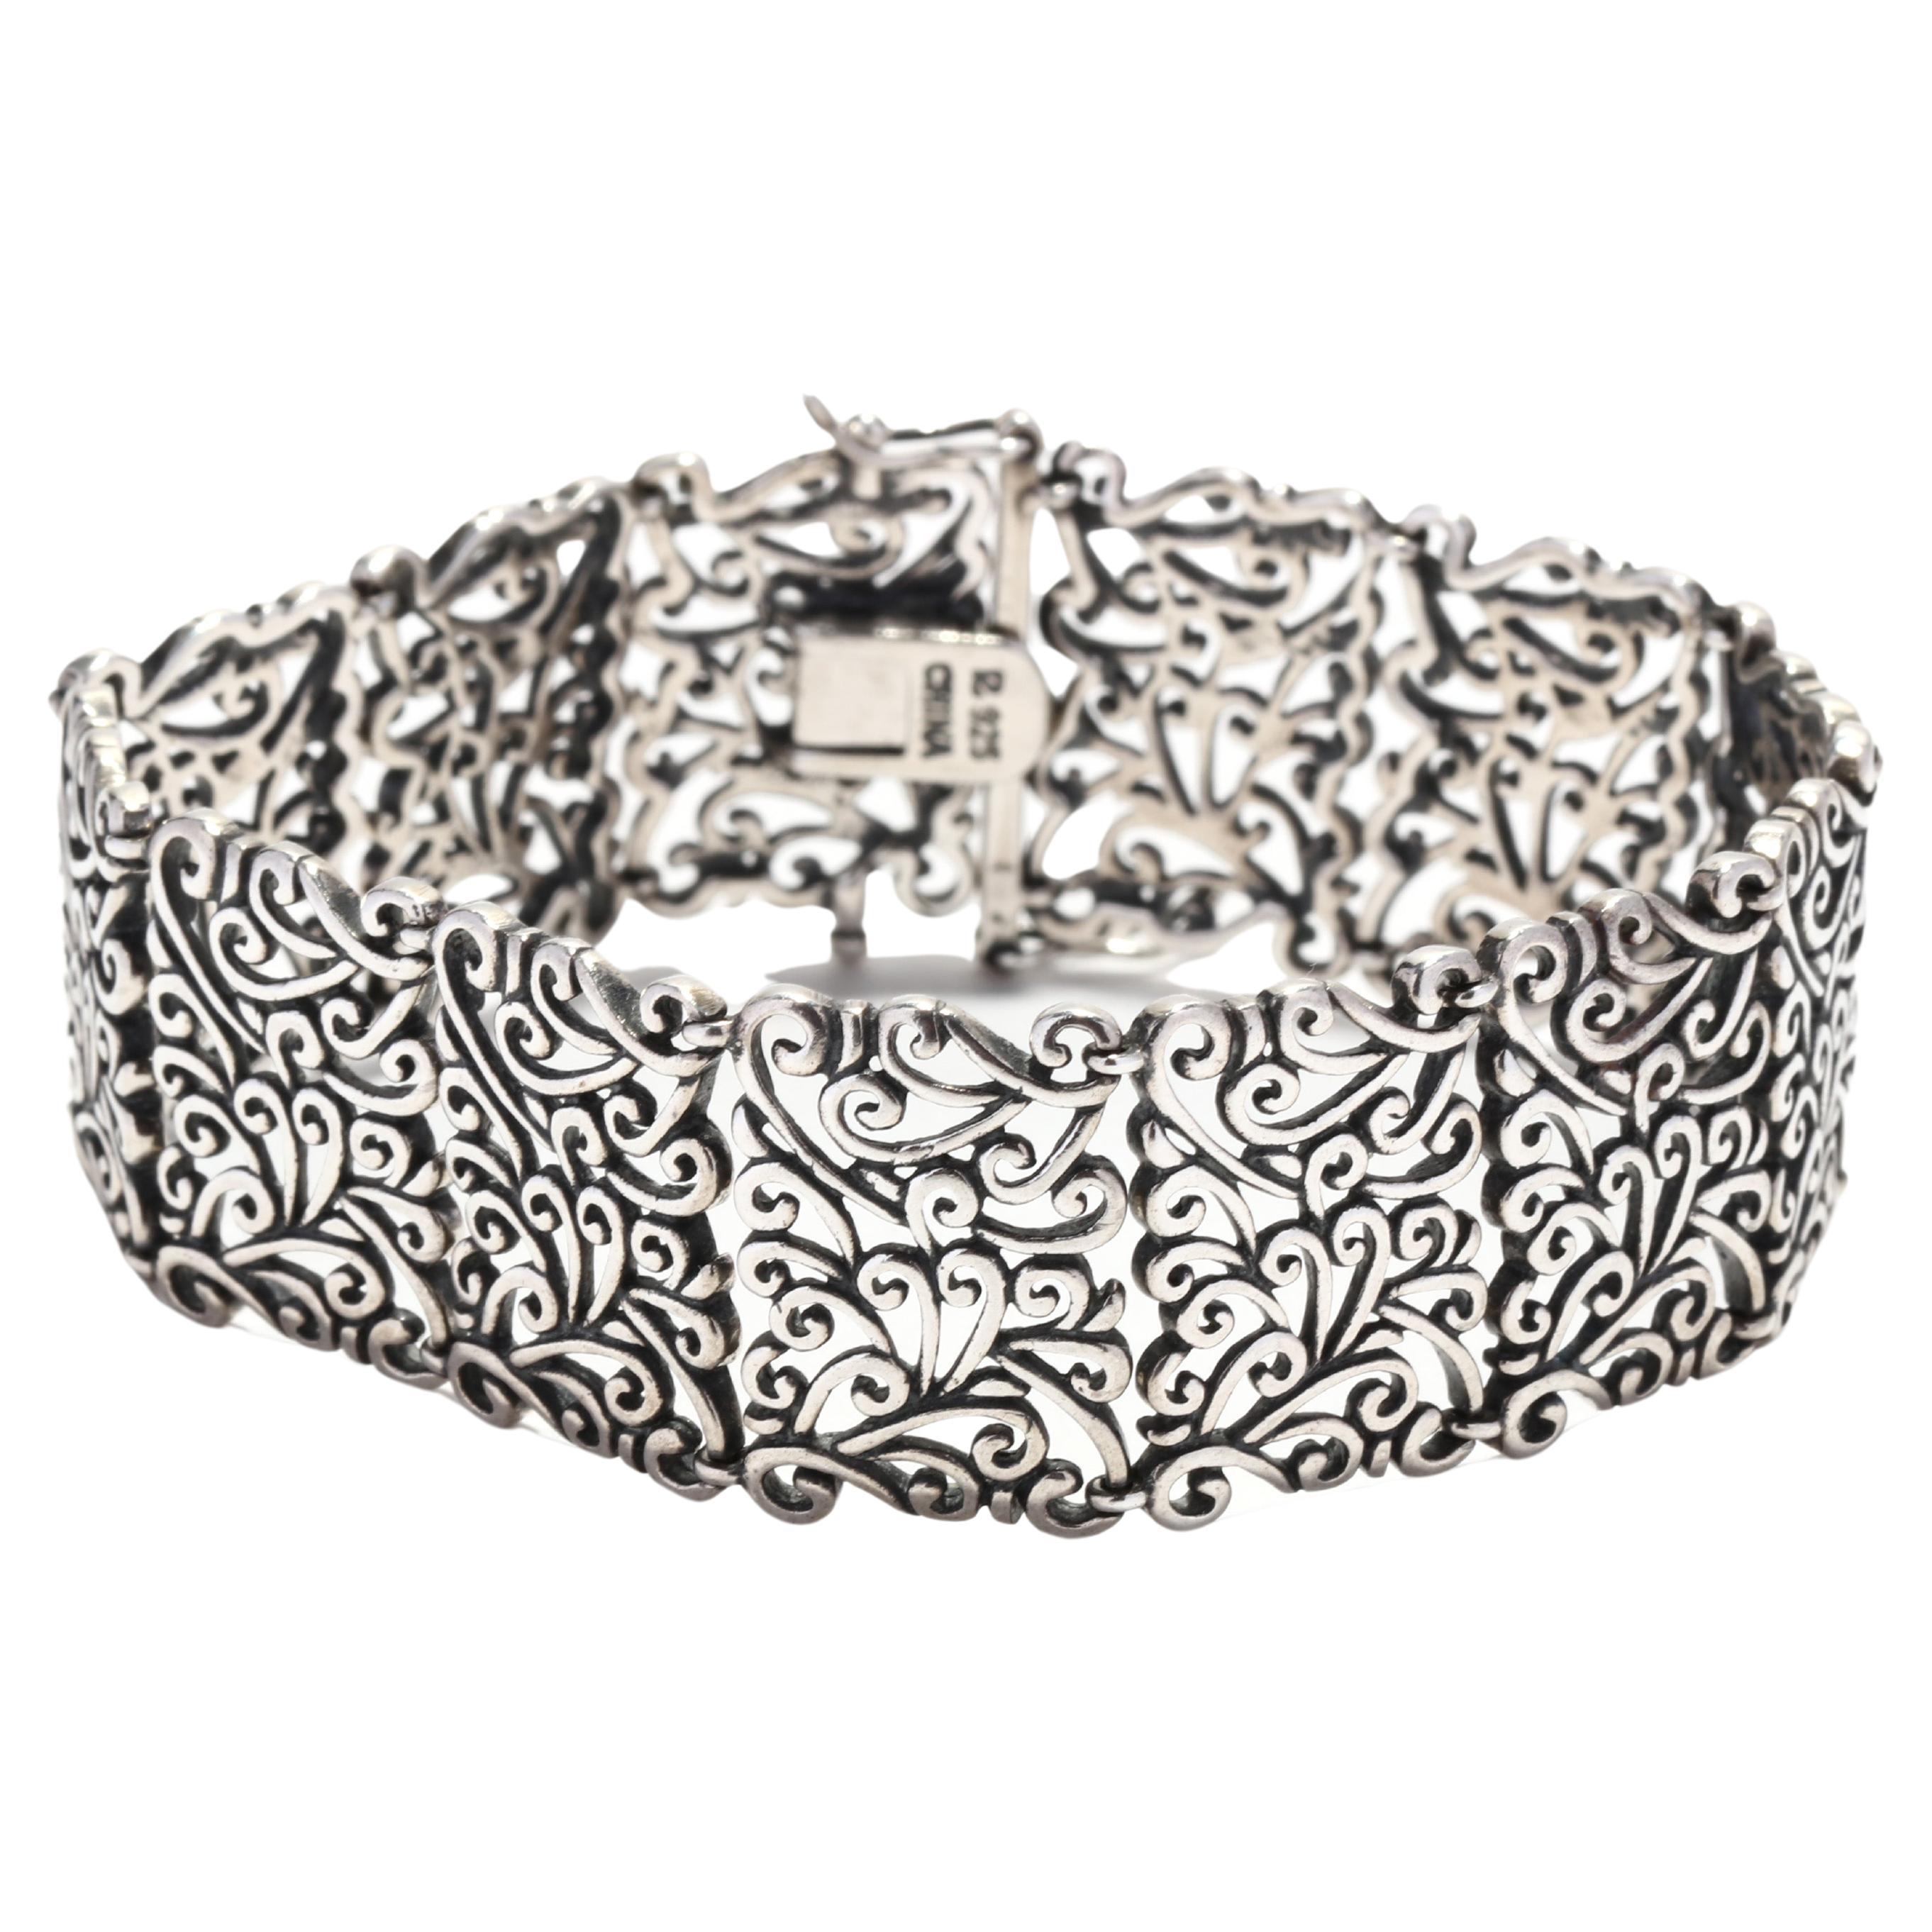 Wide Filigree Bracelet, Sterling Silver, Length 7.25 Inches, Wide Silver  For Sale